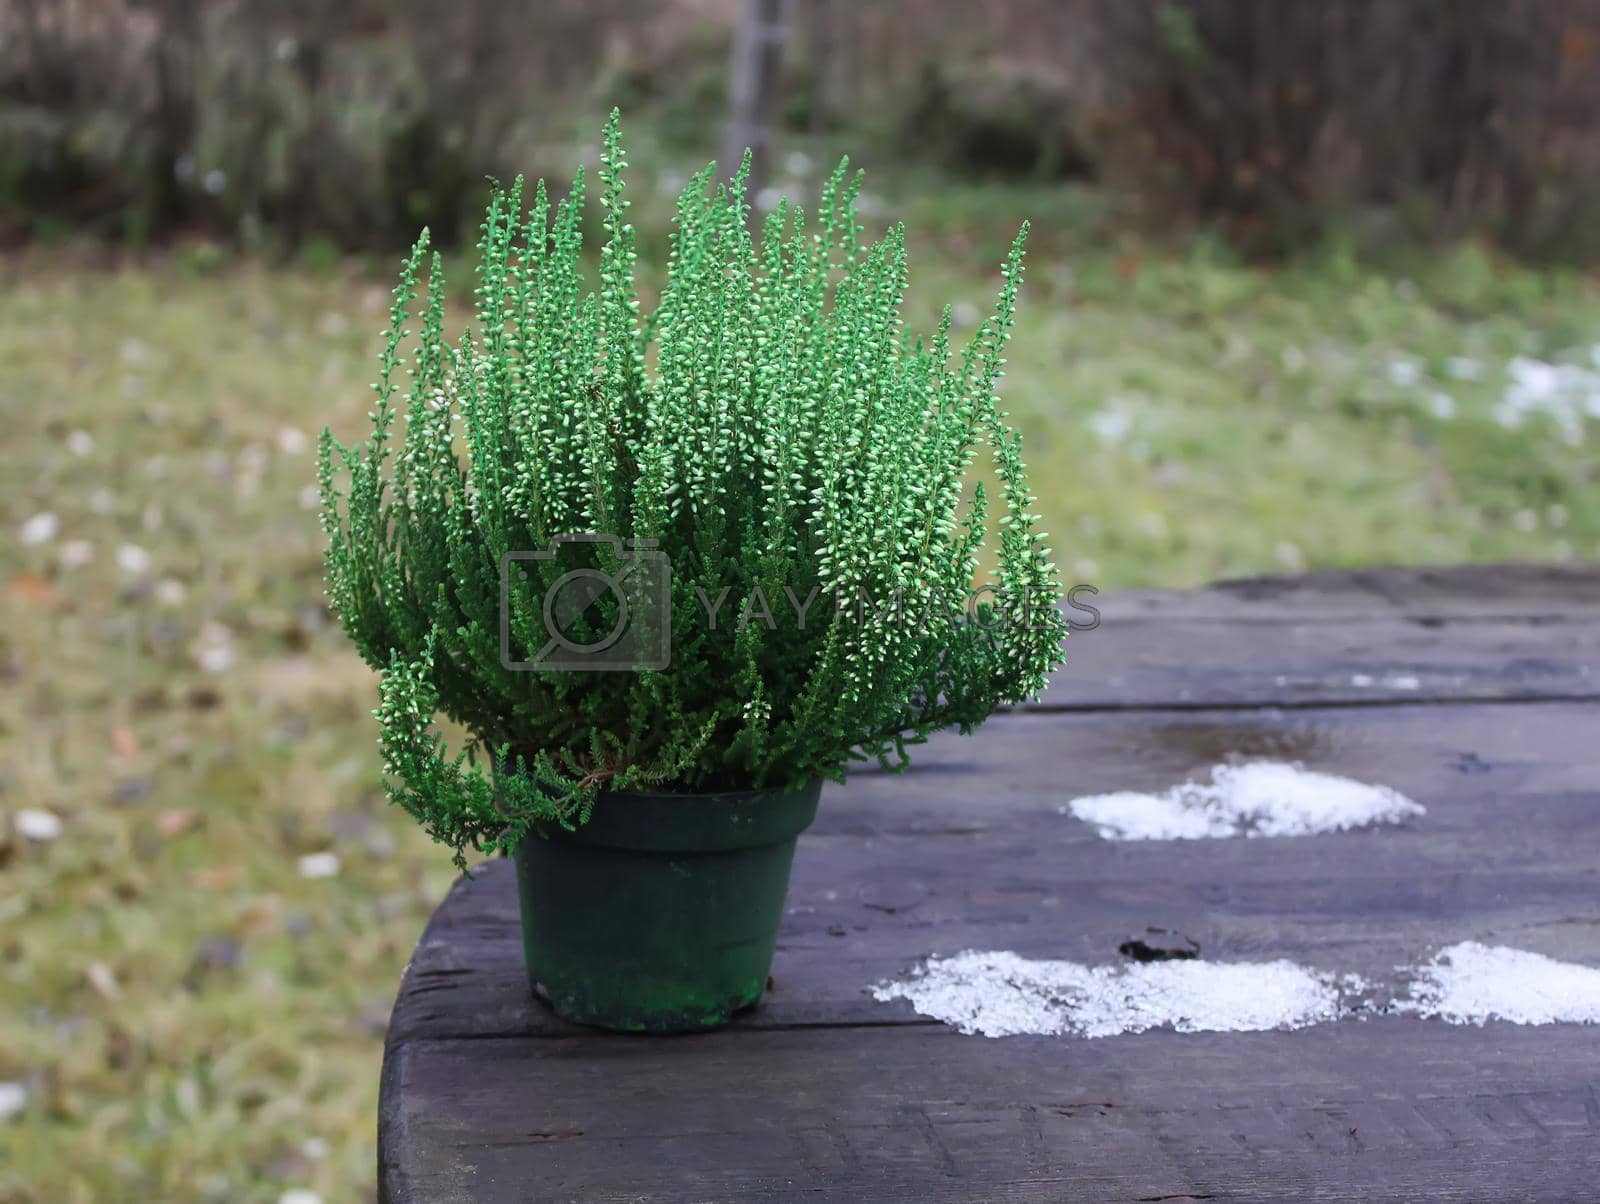 Royalty free image of Pots with young conifer plants by nightlyviolet